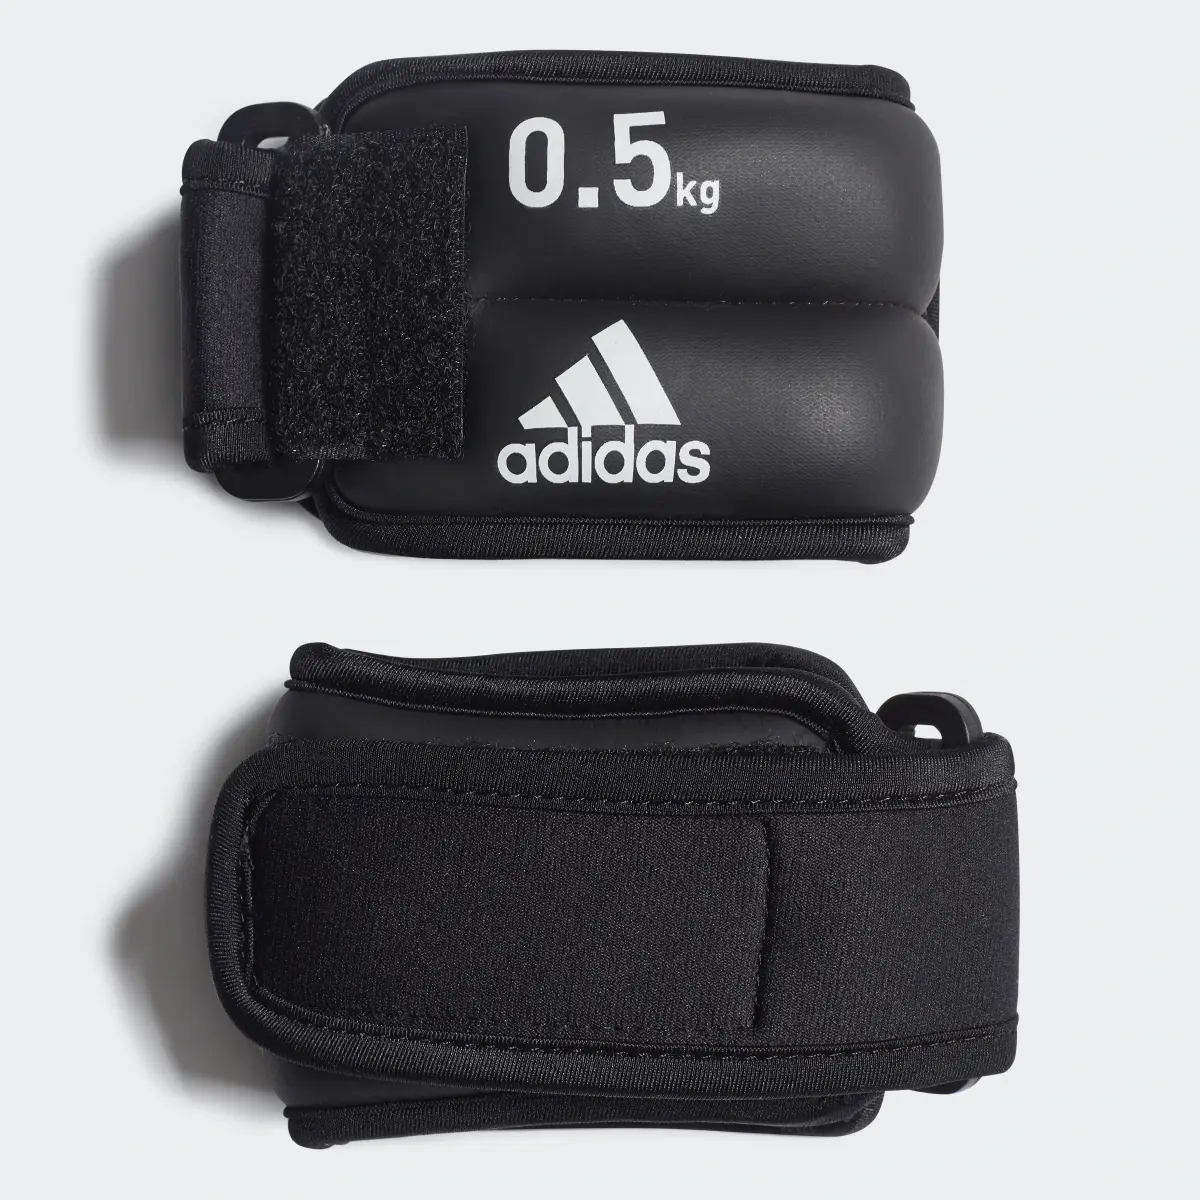 Adidas Ankle / Wrist Weights. 1